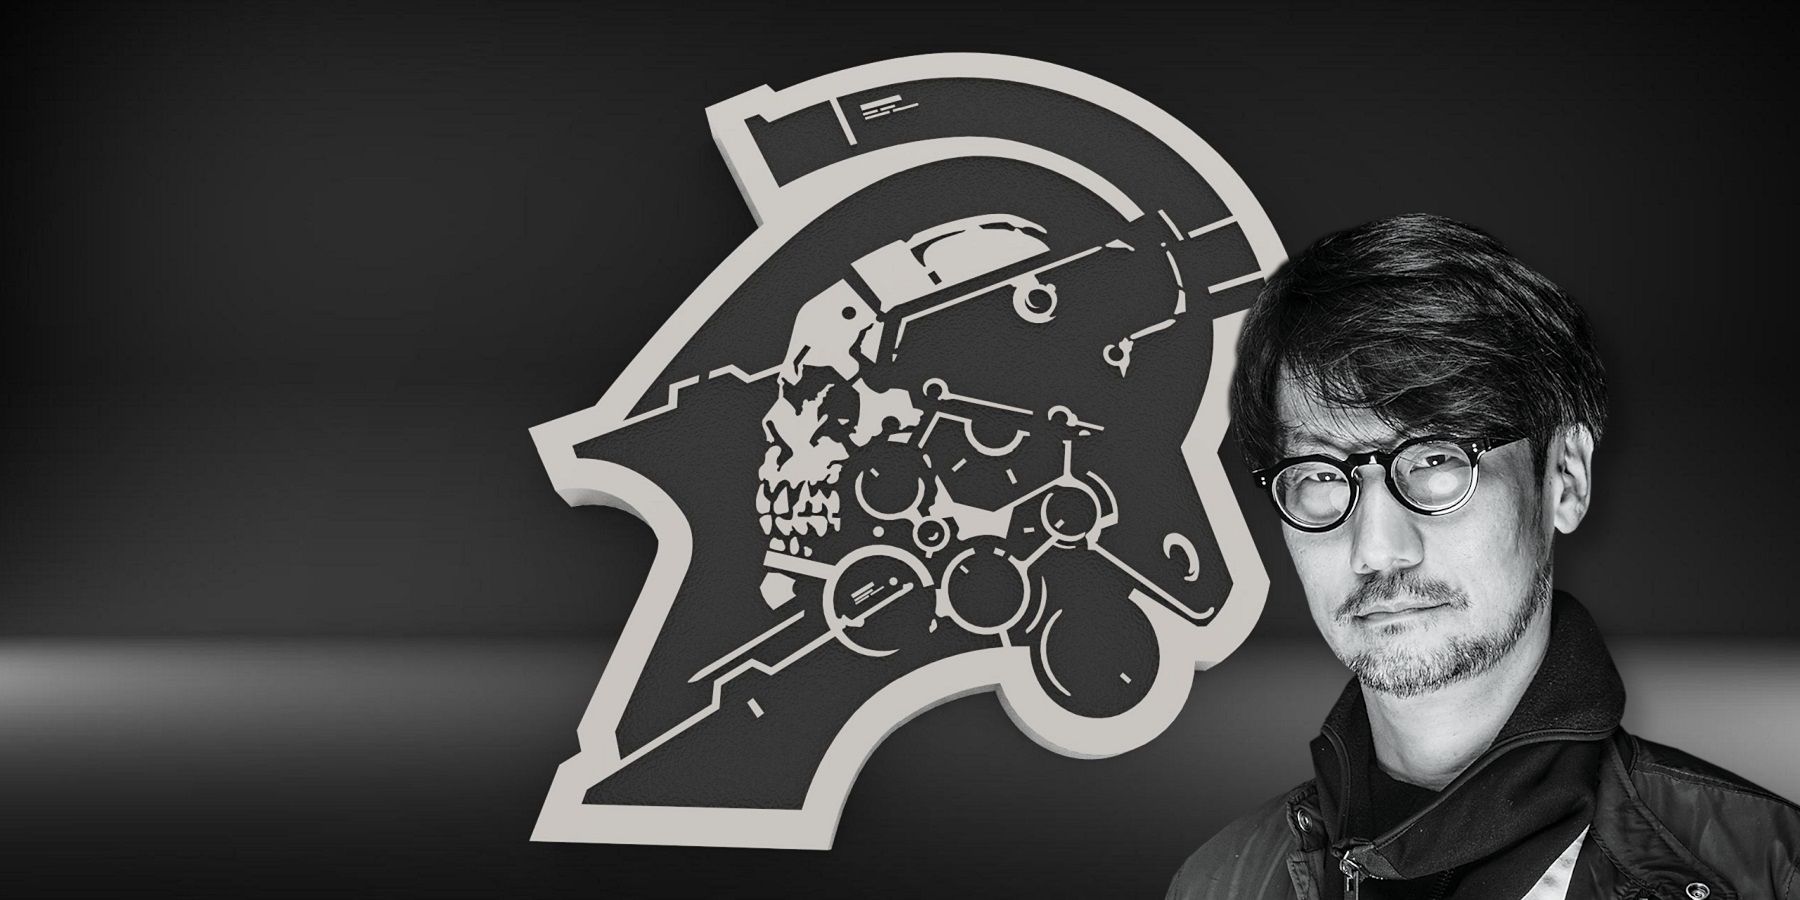 Black and white photo of Hideo Kojima in front of the Kojima Productions logo.